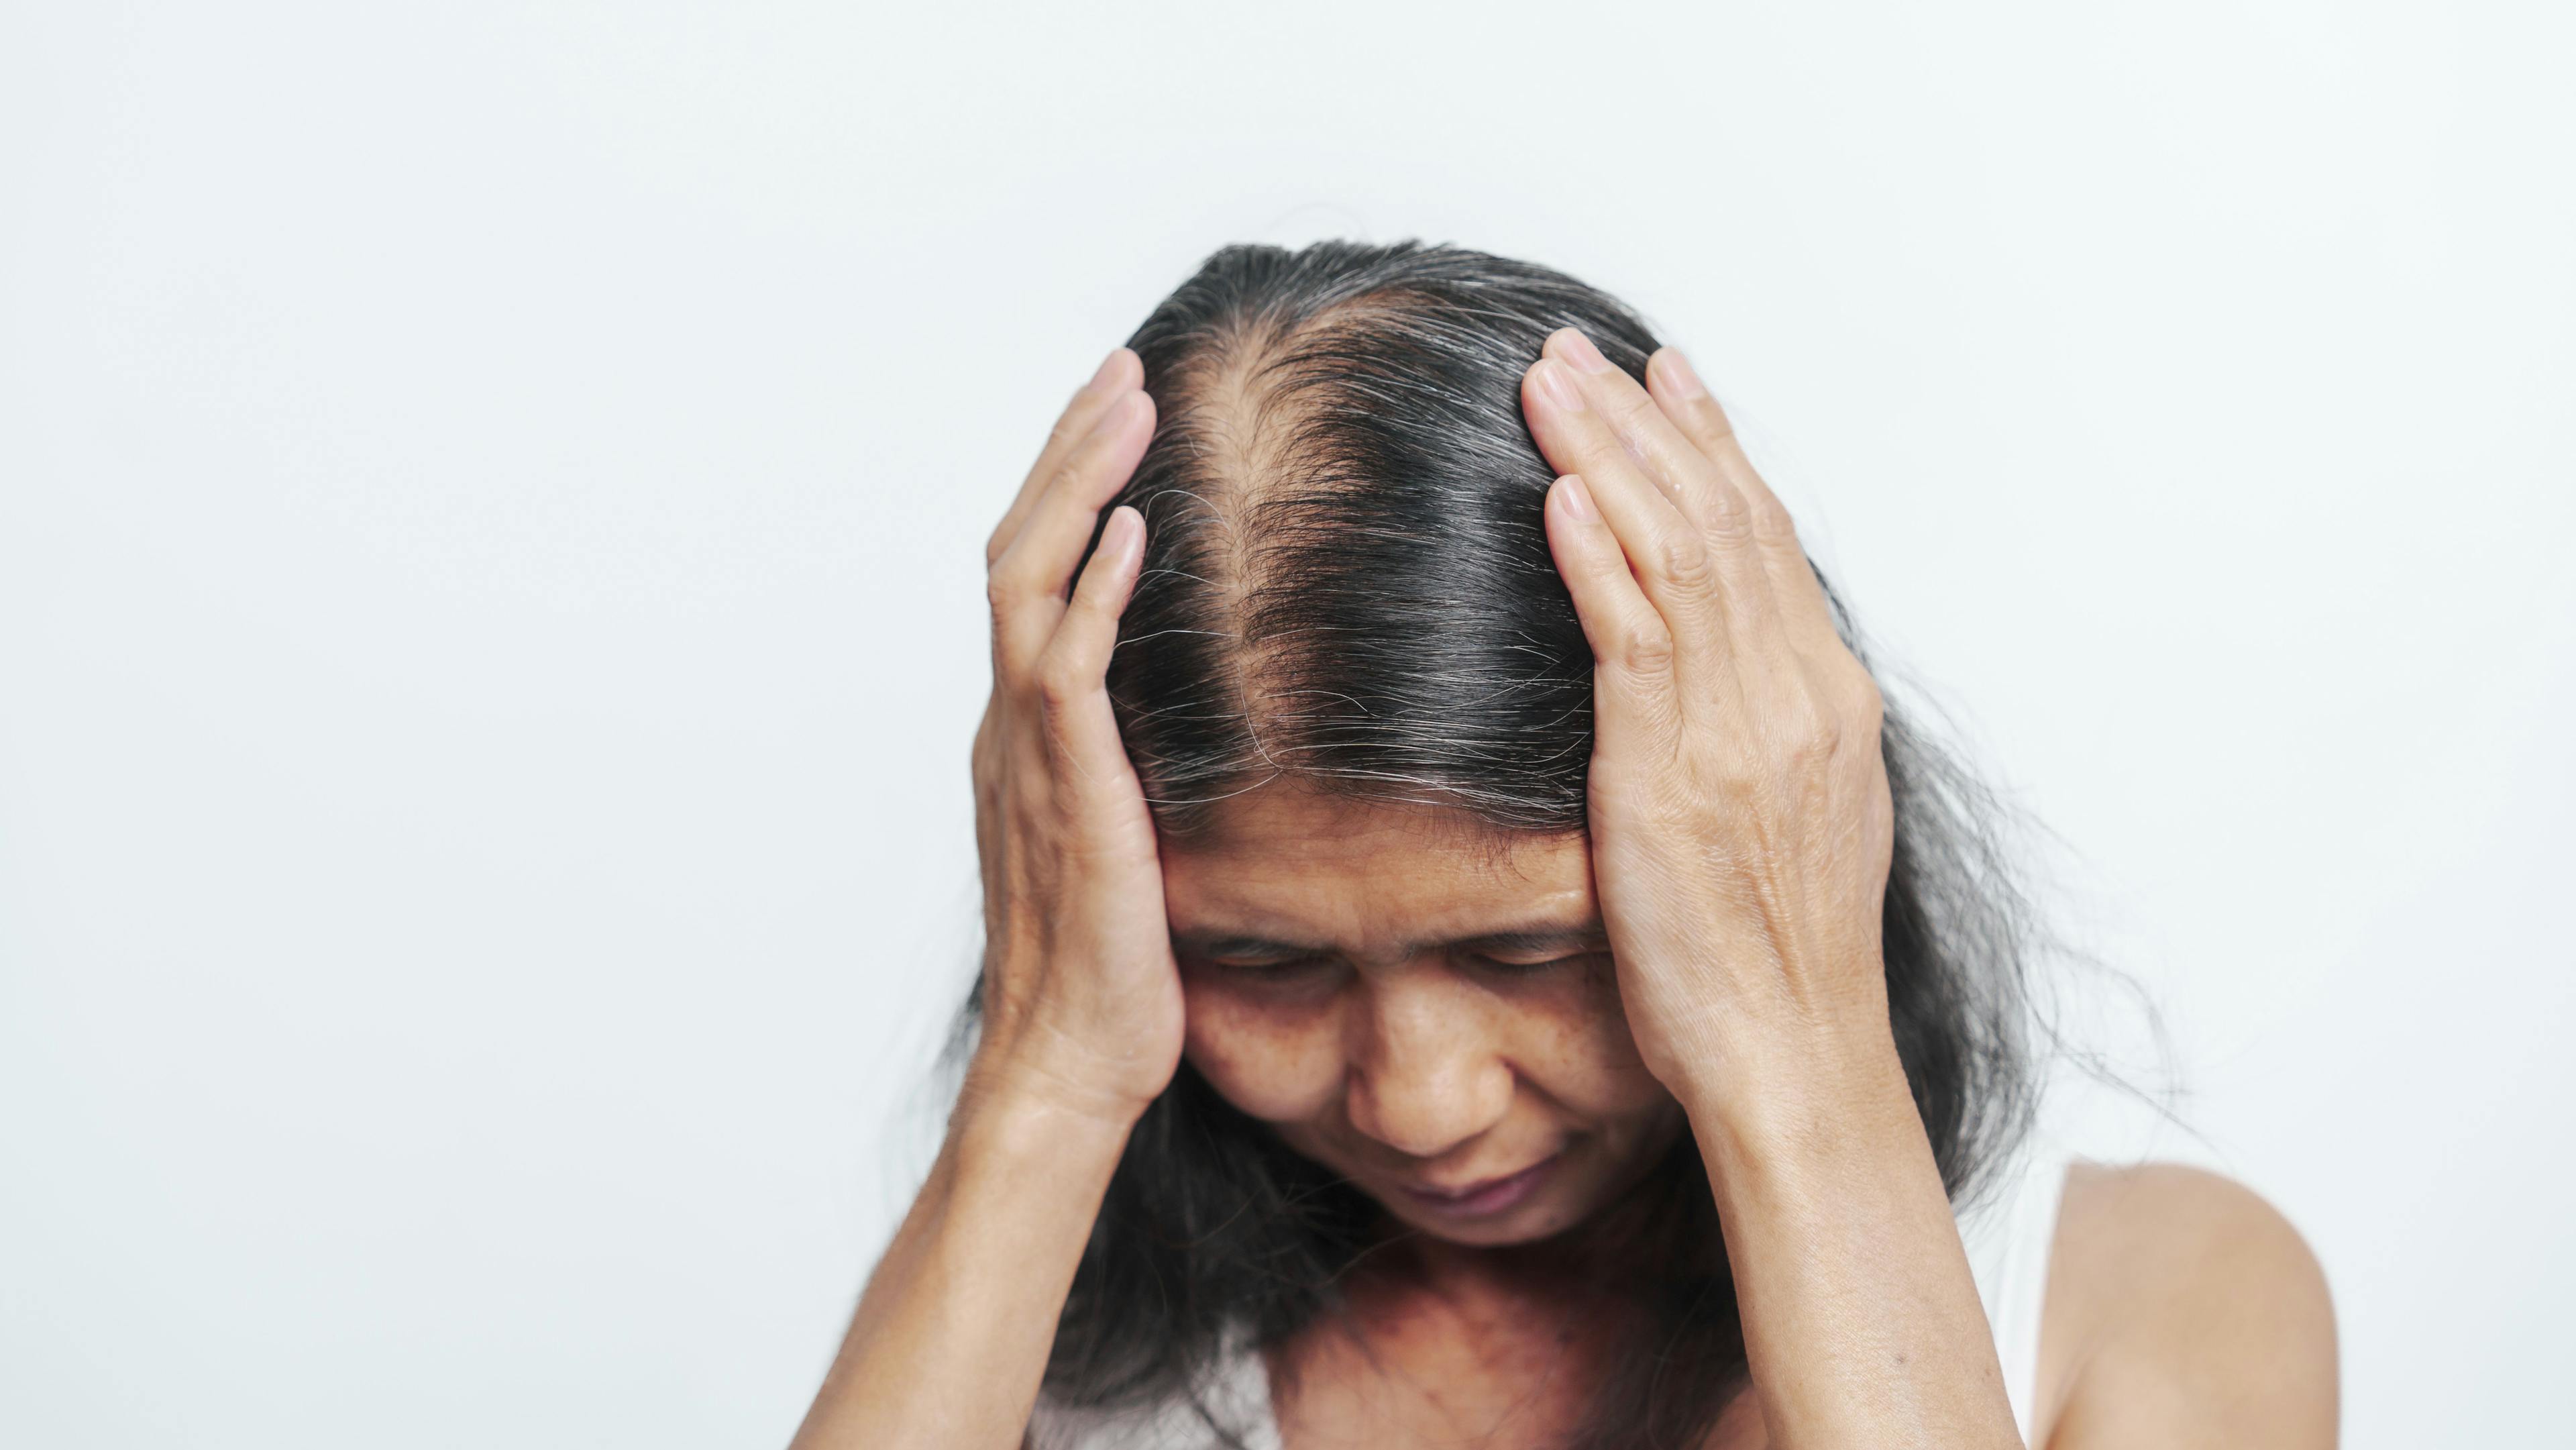 Clinical Trial Disparities, Alopecia Areata Misdiagnoses Prevalent Among Non-White Patients